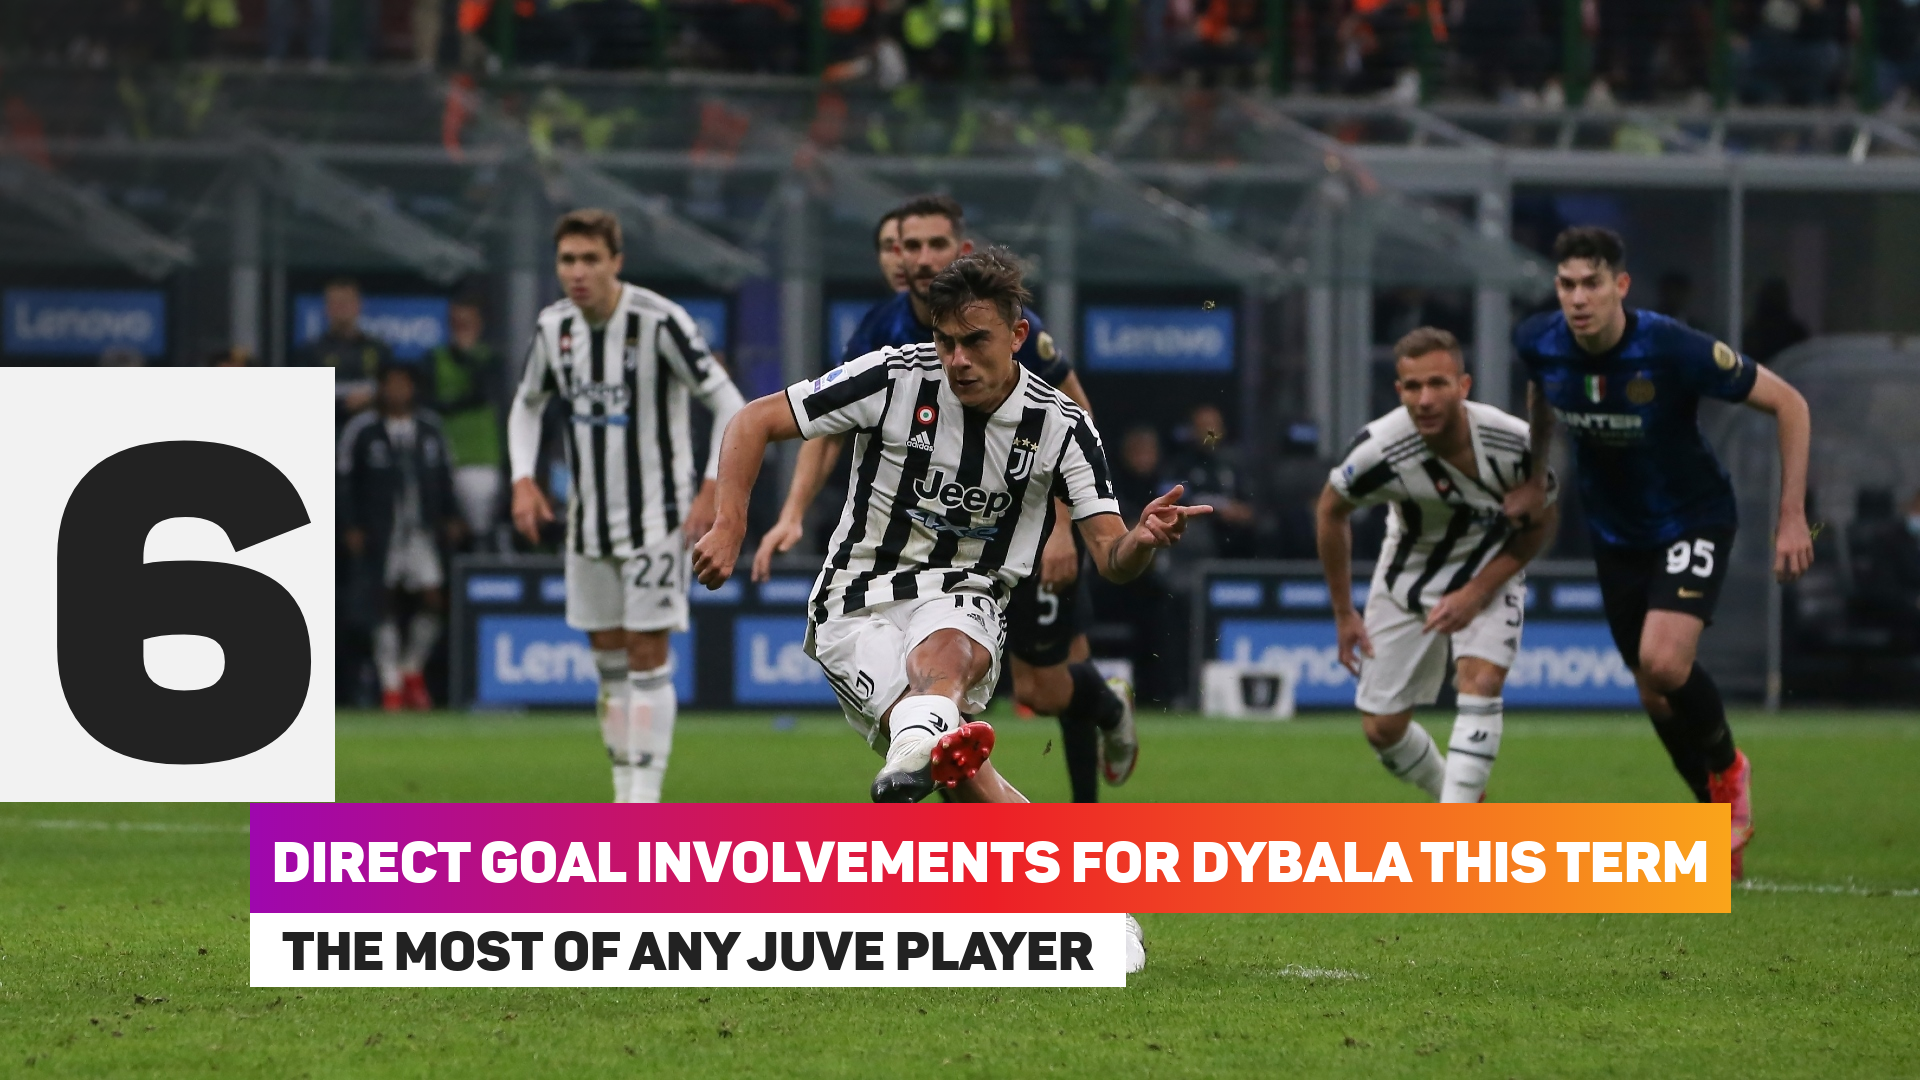 Paulo Dybala has been directly involved in six goals this season